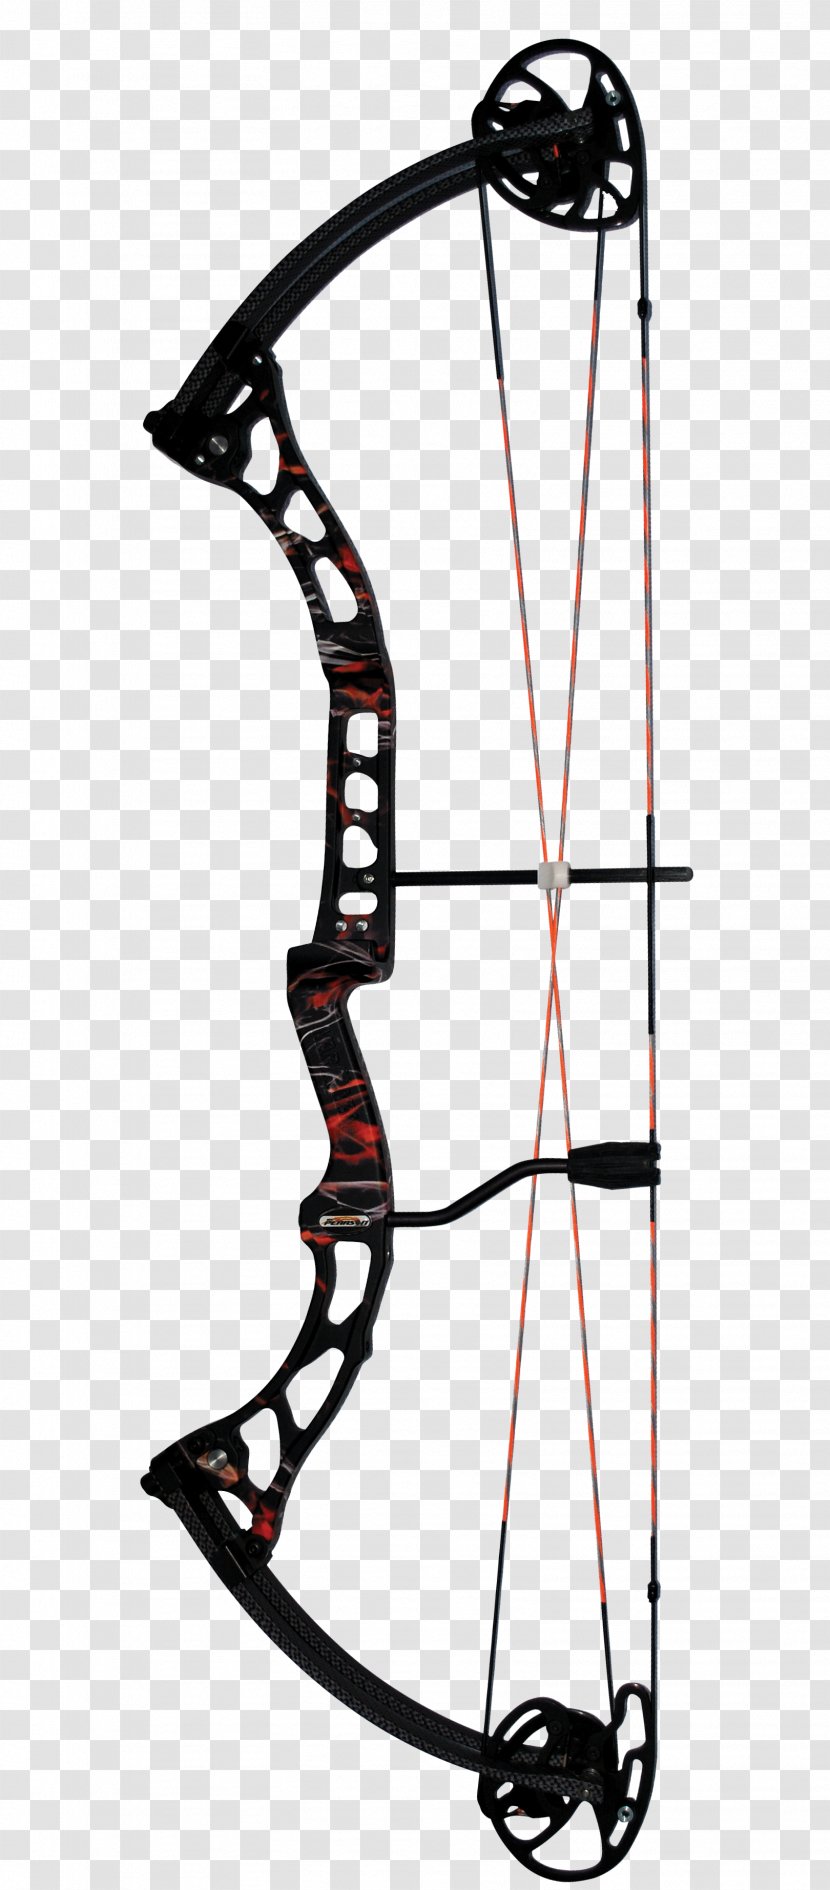 Compound Bows Bow And Arrow Archery Transparent PNG